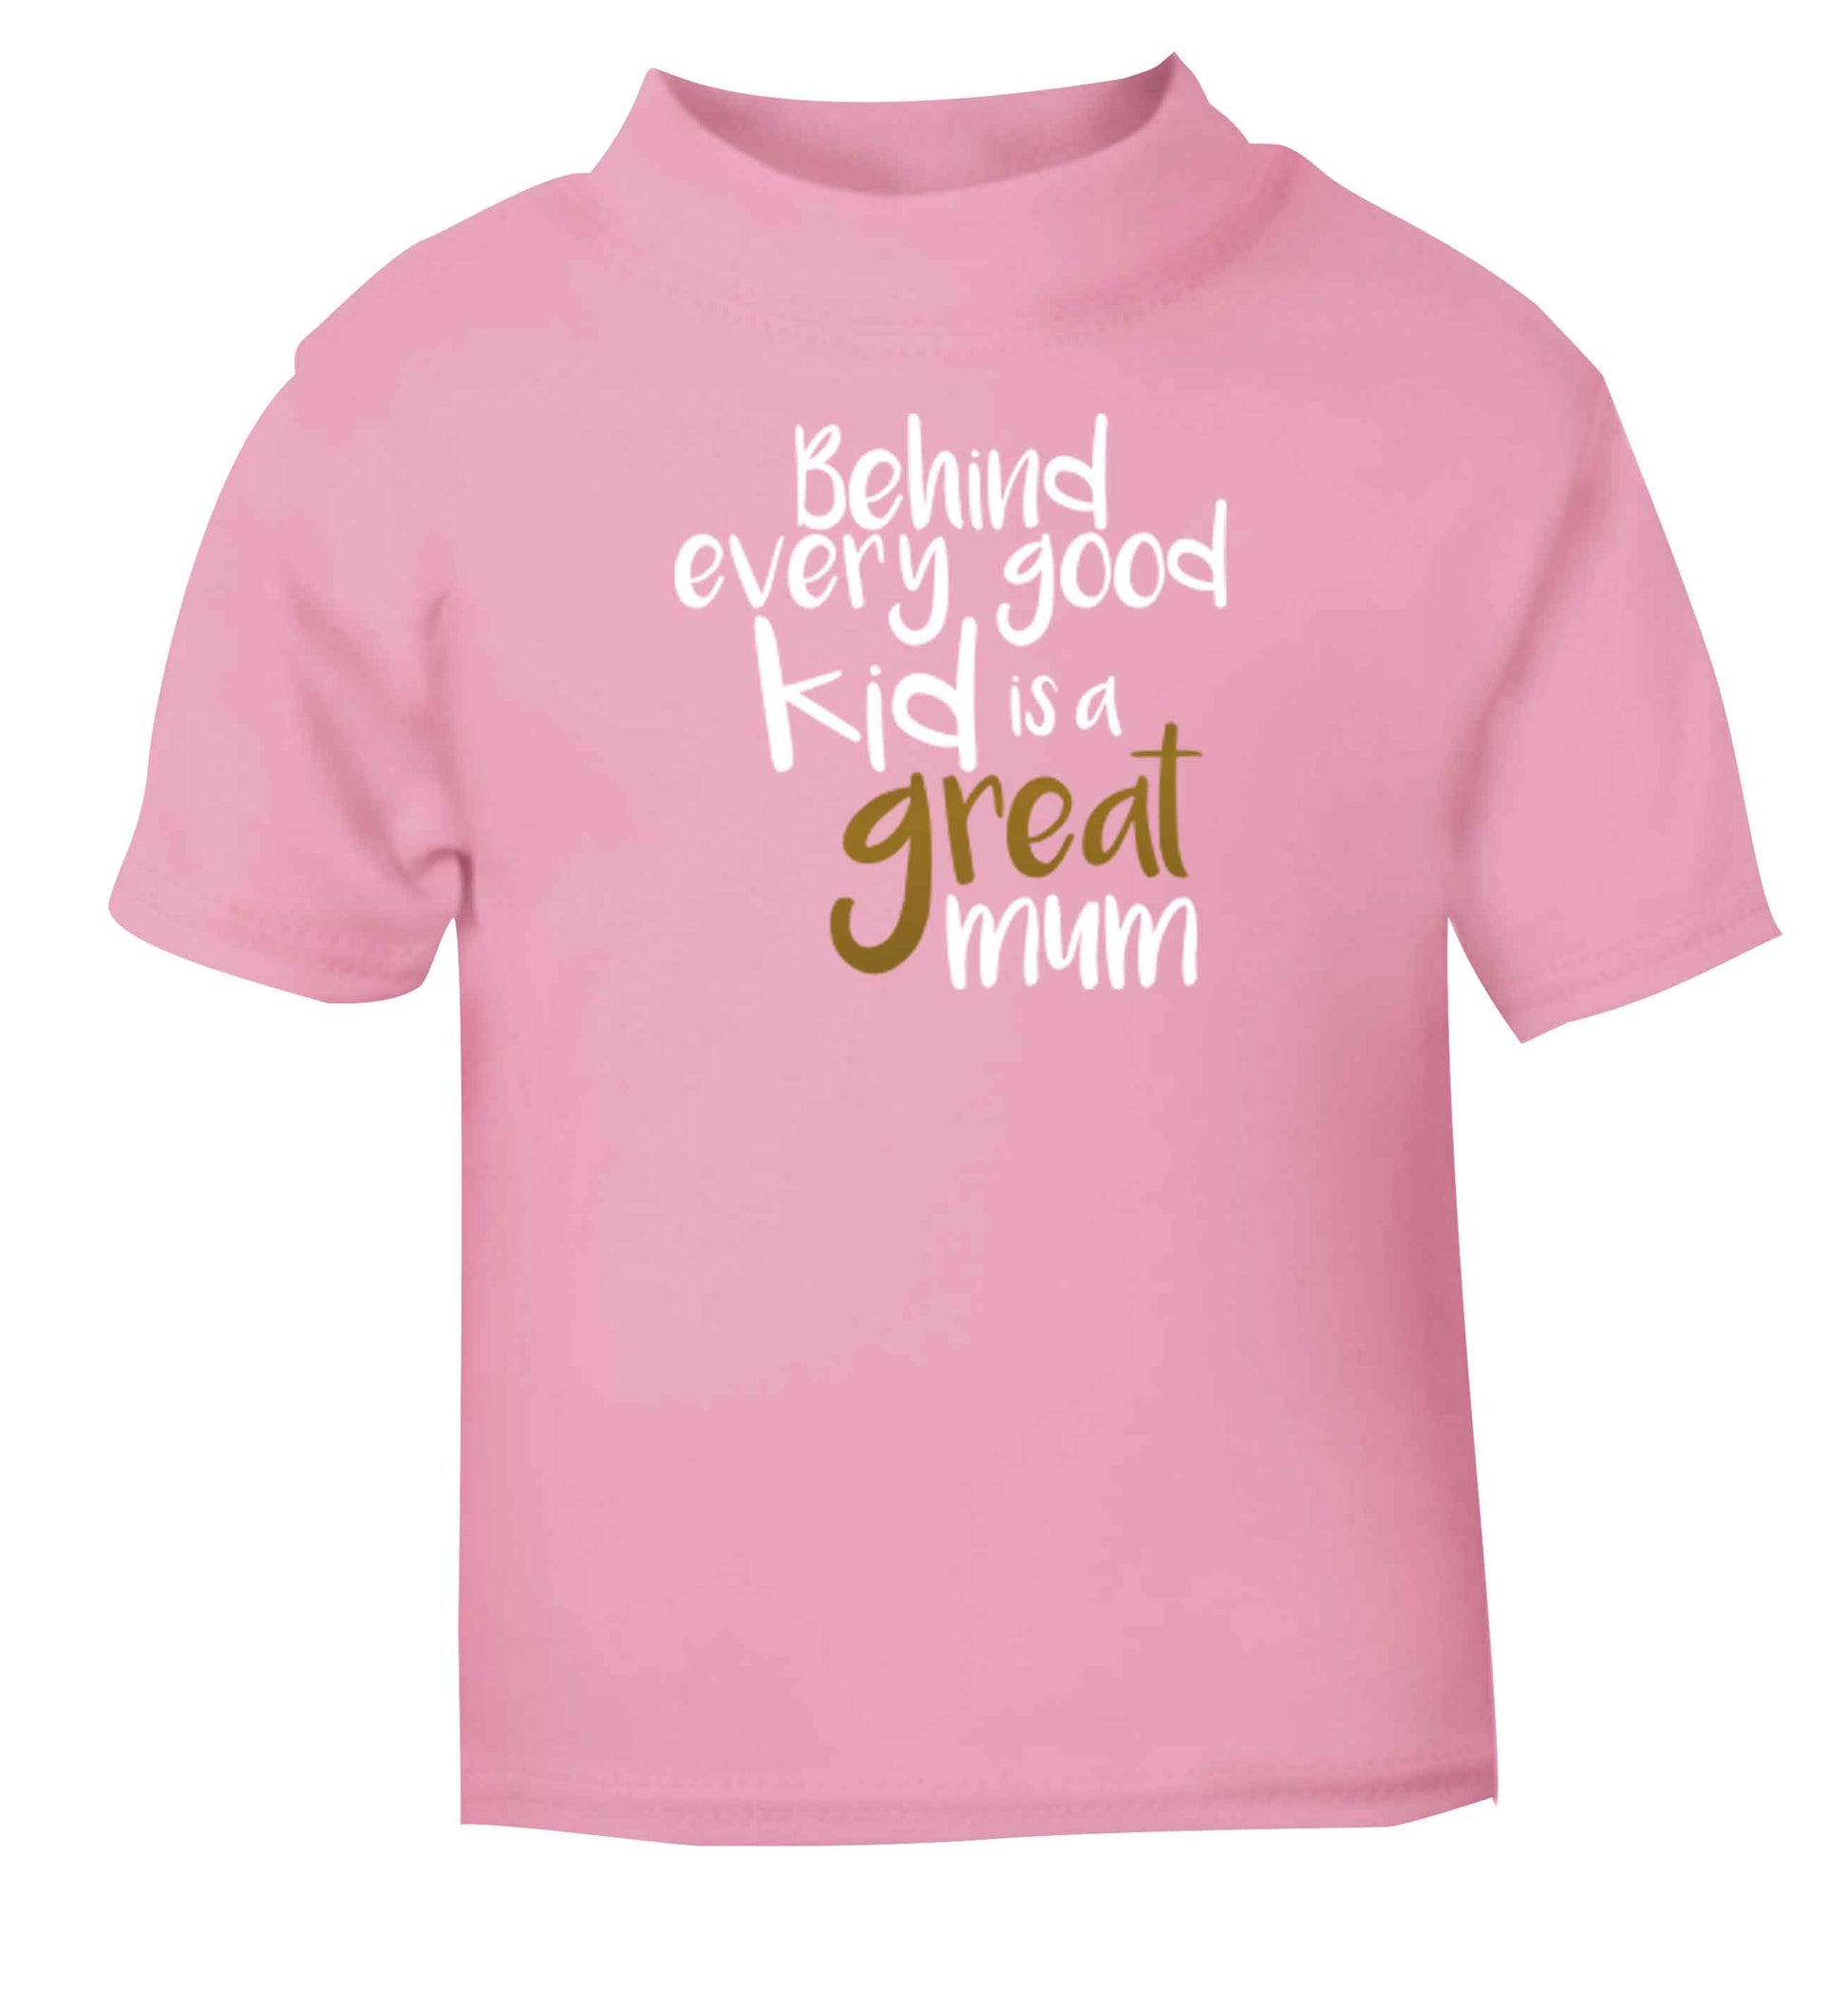 Behind every good kid is a great mum Children's light pink Tshirt 12-13 Years